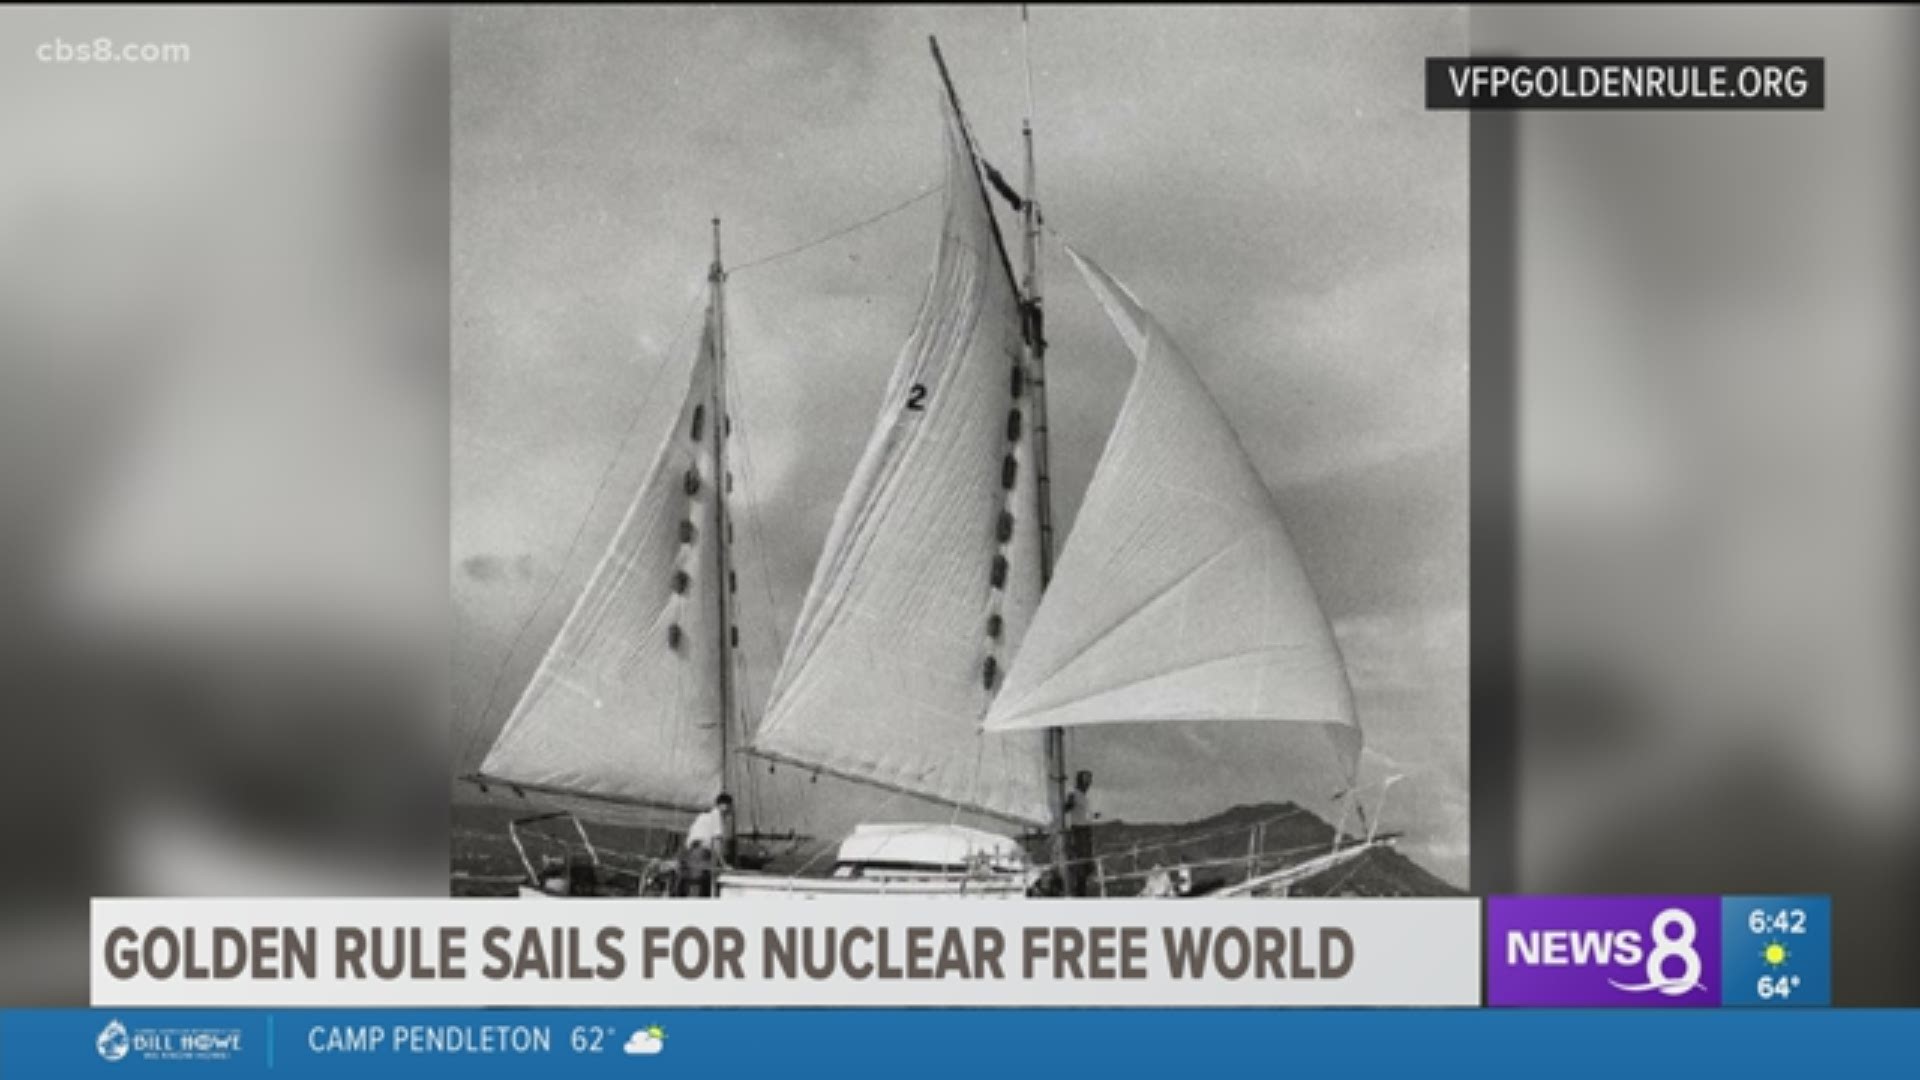 A historic boat used to disrupt nuclear testing back in the 1960s has been fully restored and now has a new mission. News 8's Shawn Styles shows us what is in store for the Golden Rule.